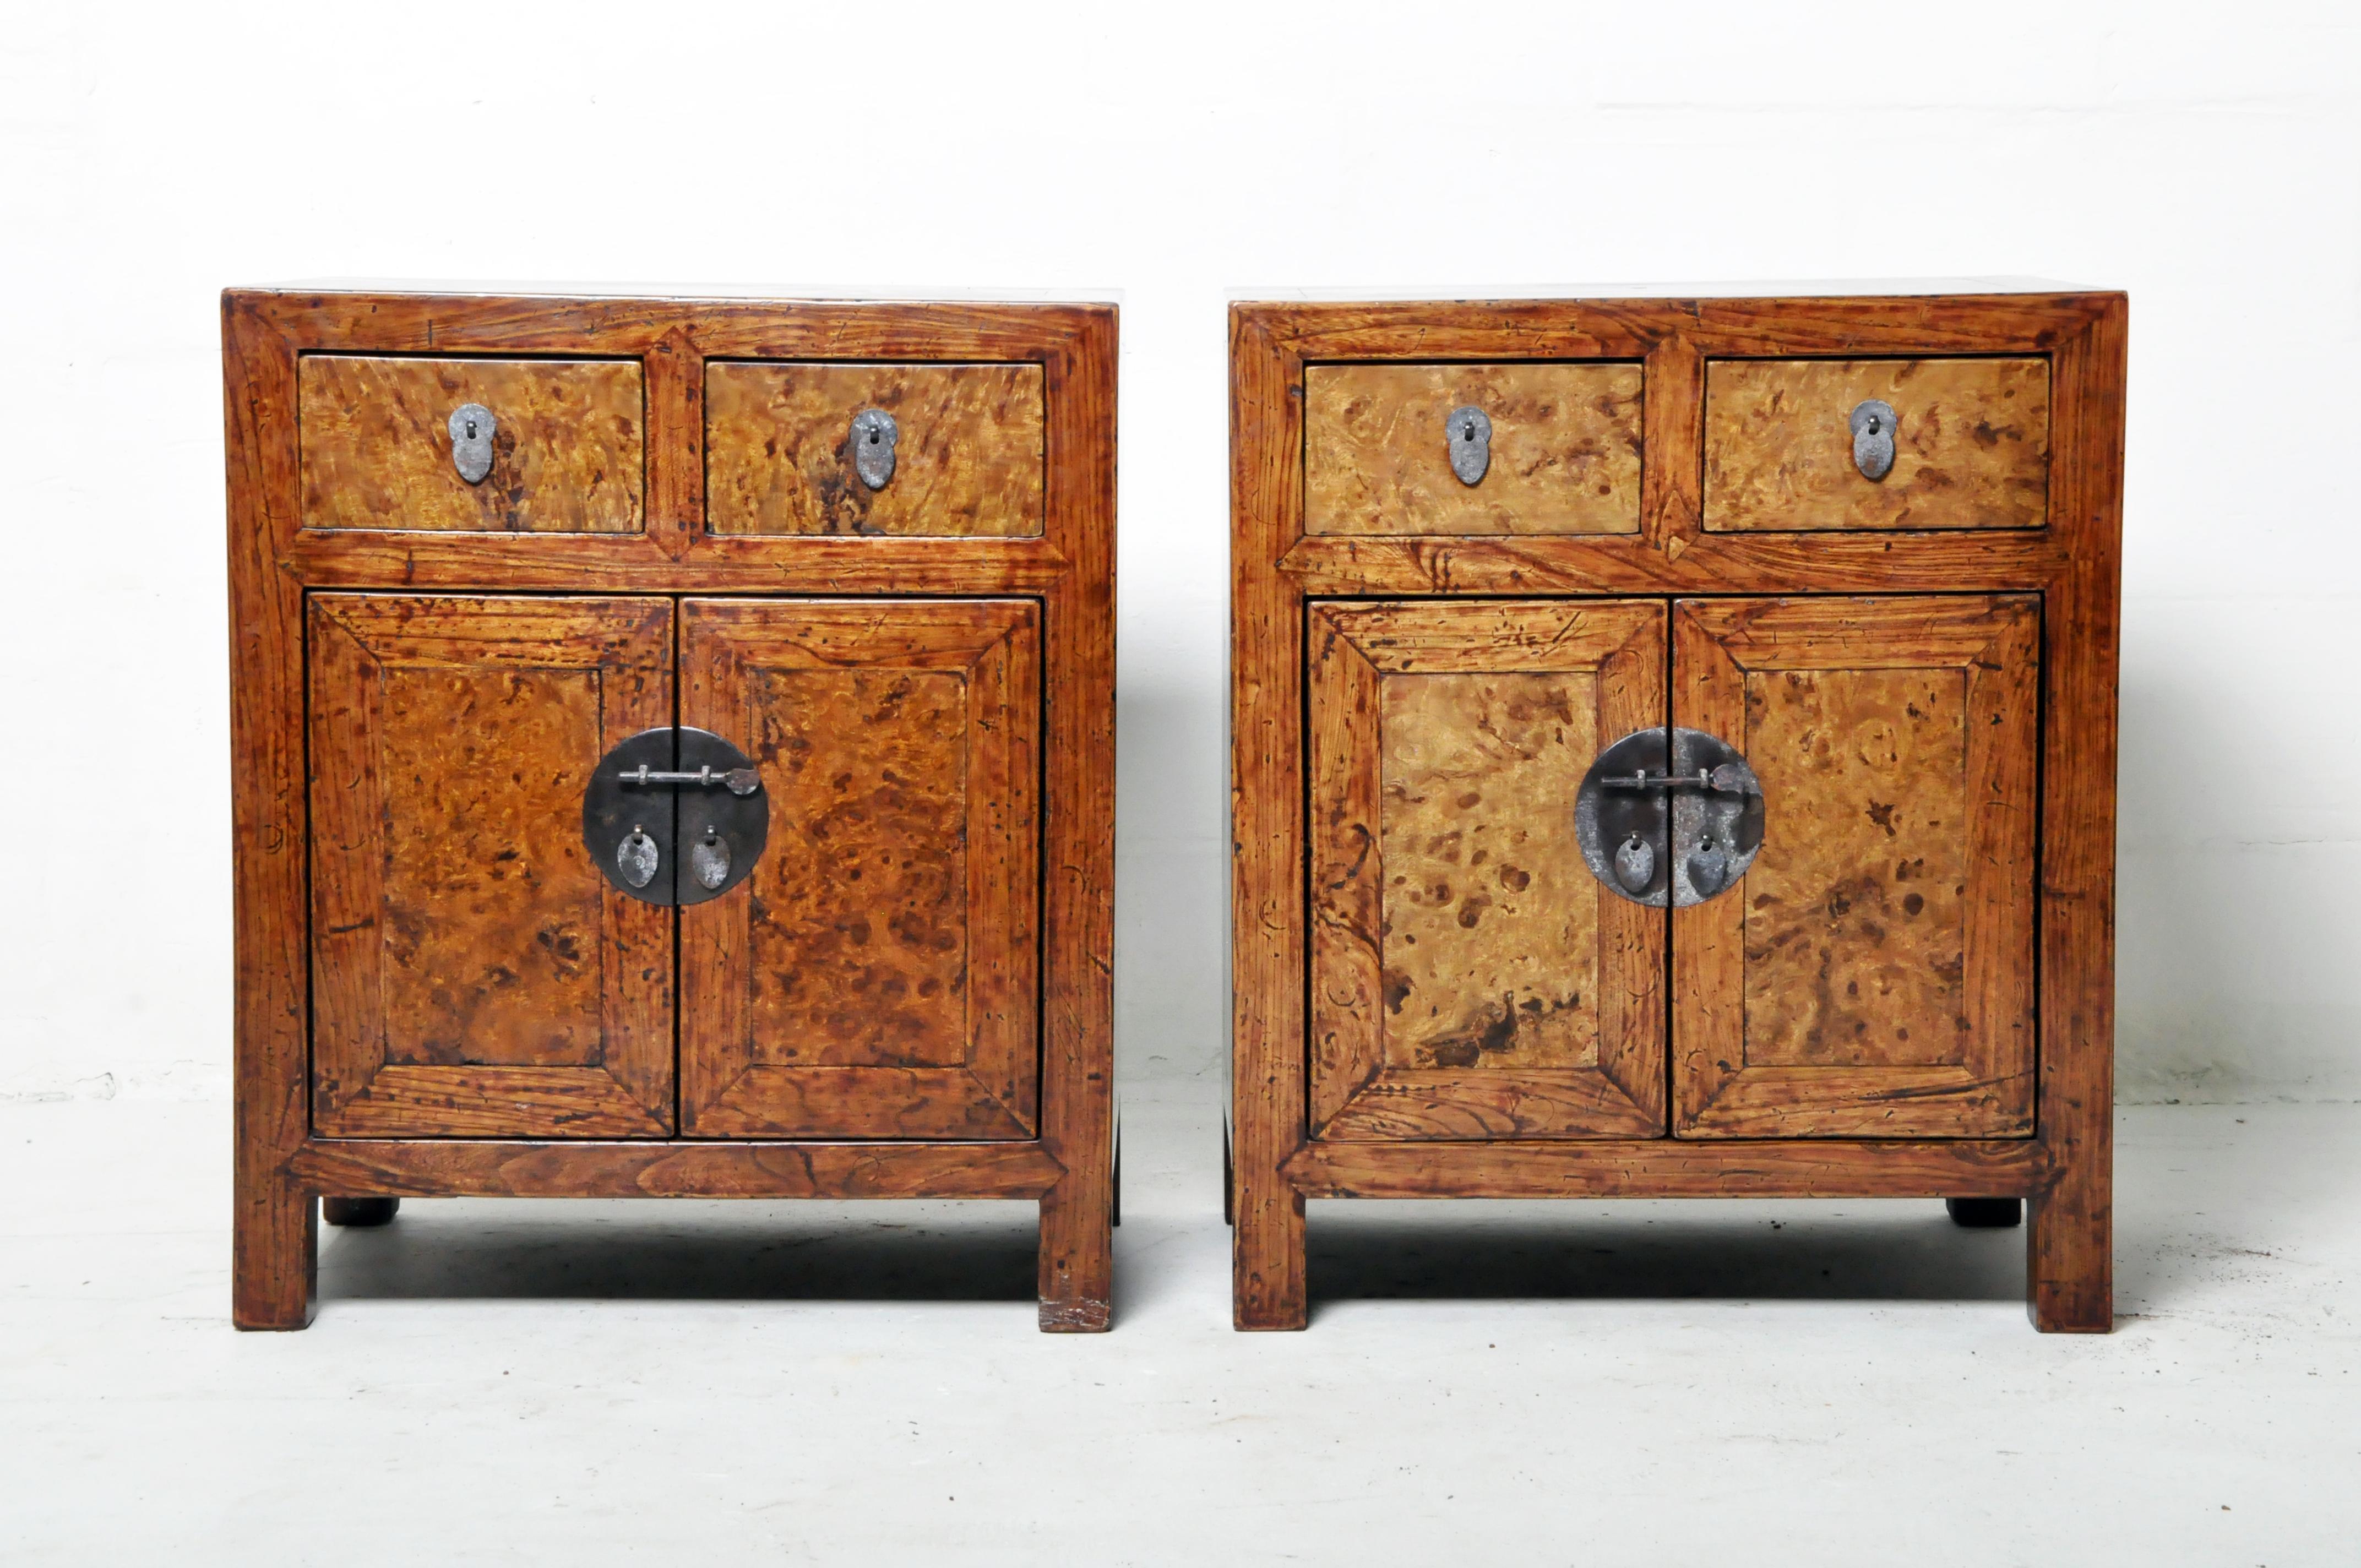 A restored pair of Chinese side chests. These chests are made from elmwood and have burlwood drawer fronts. The original oxblood lacquer was gently removed and the wood grain was revealed and protected by a layer of French polish (hand-rubbed